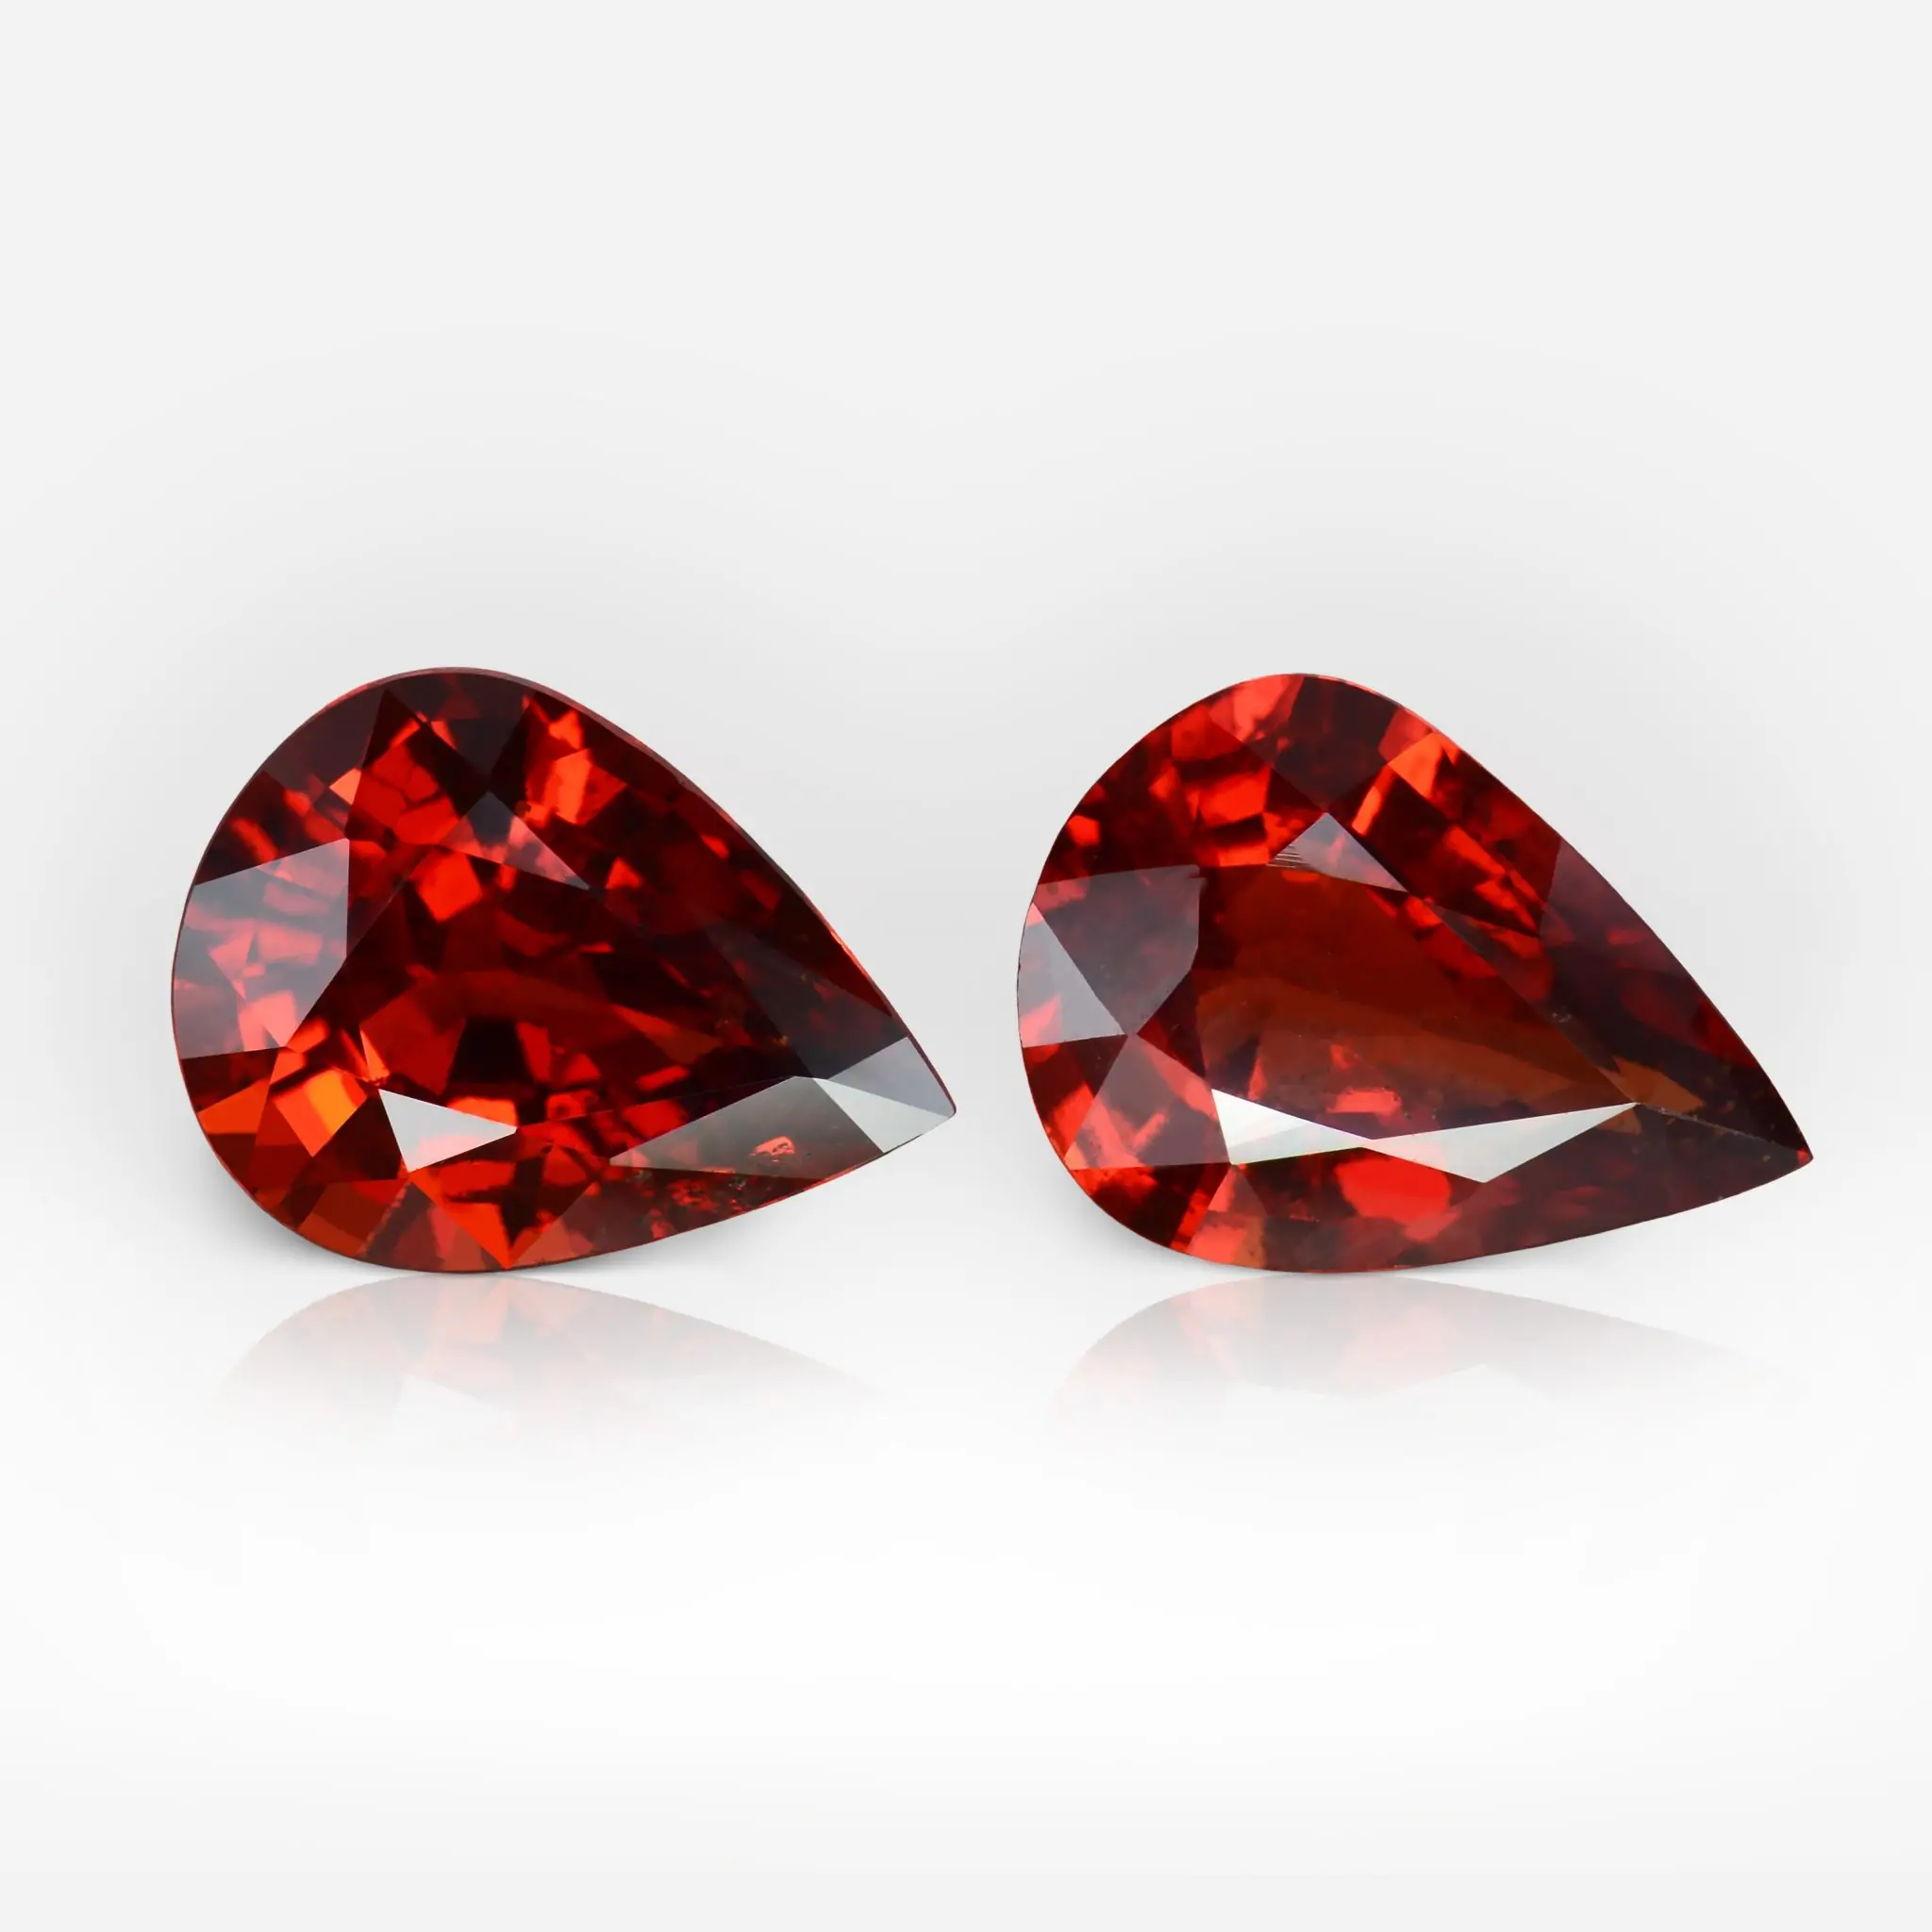 Pair of 5.15 carat Pear Shape Vivid Red Madagascar Ruby - picture 1